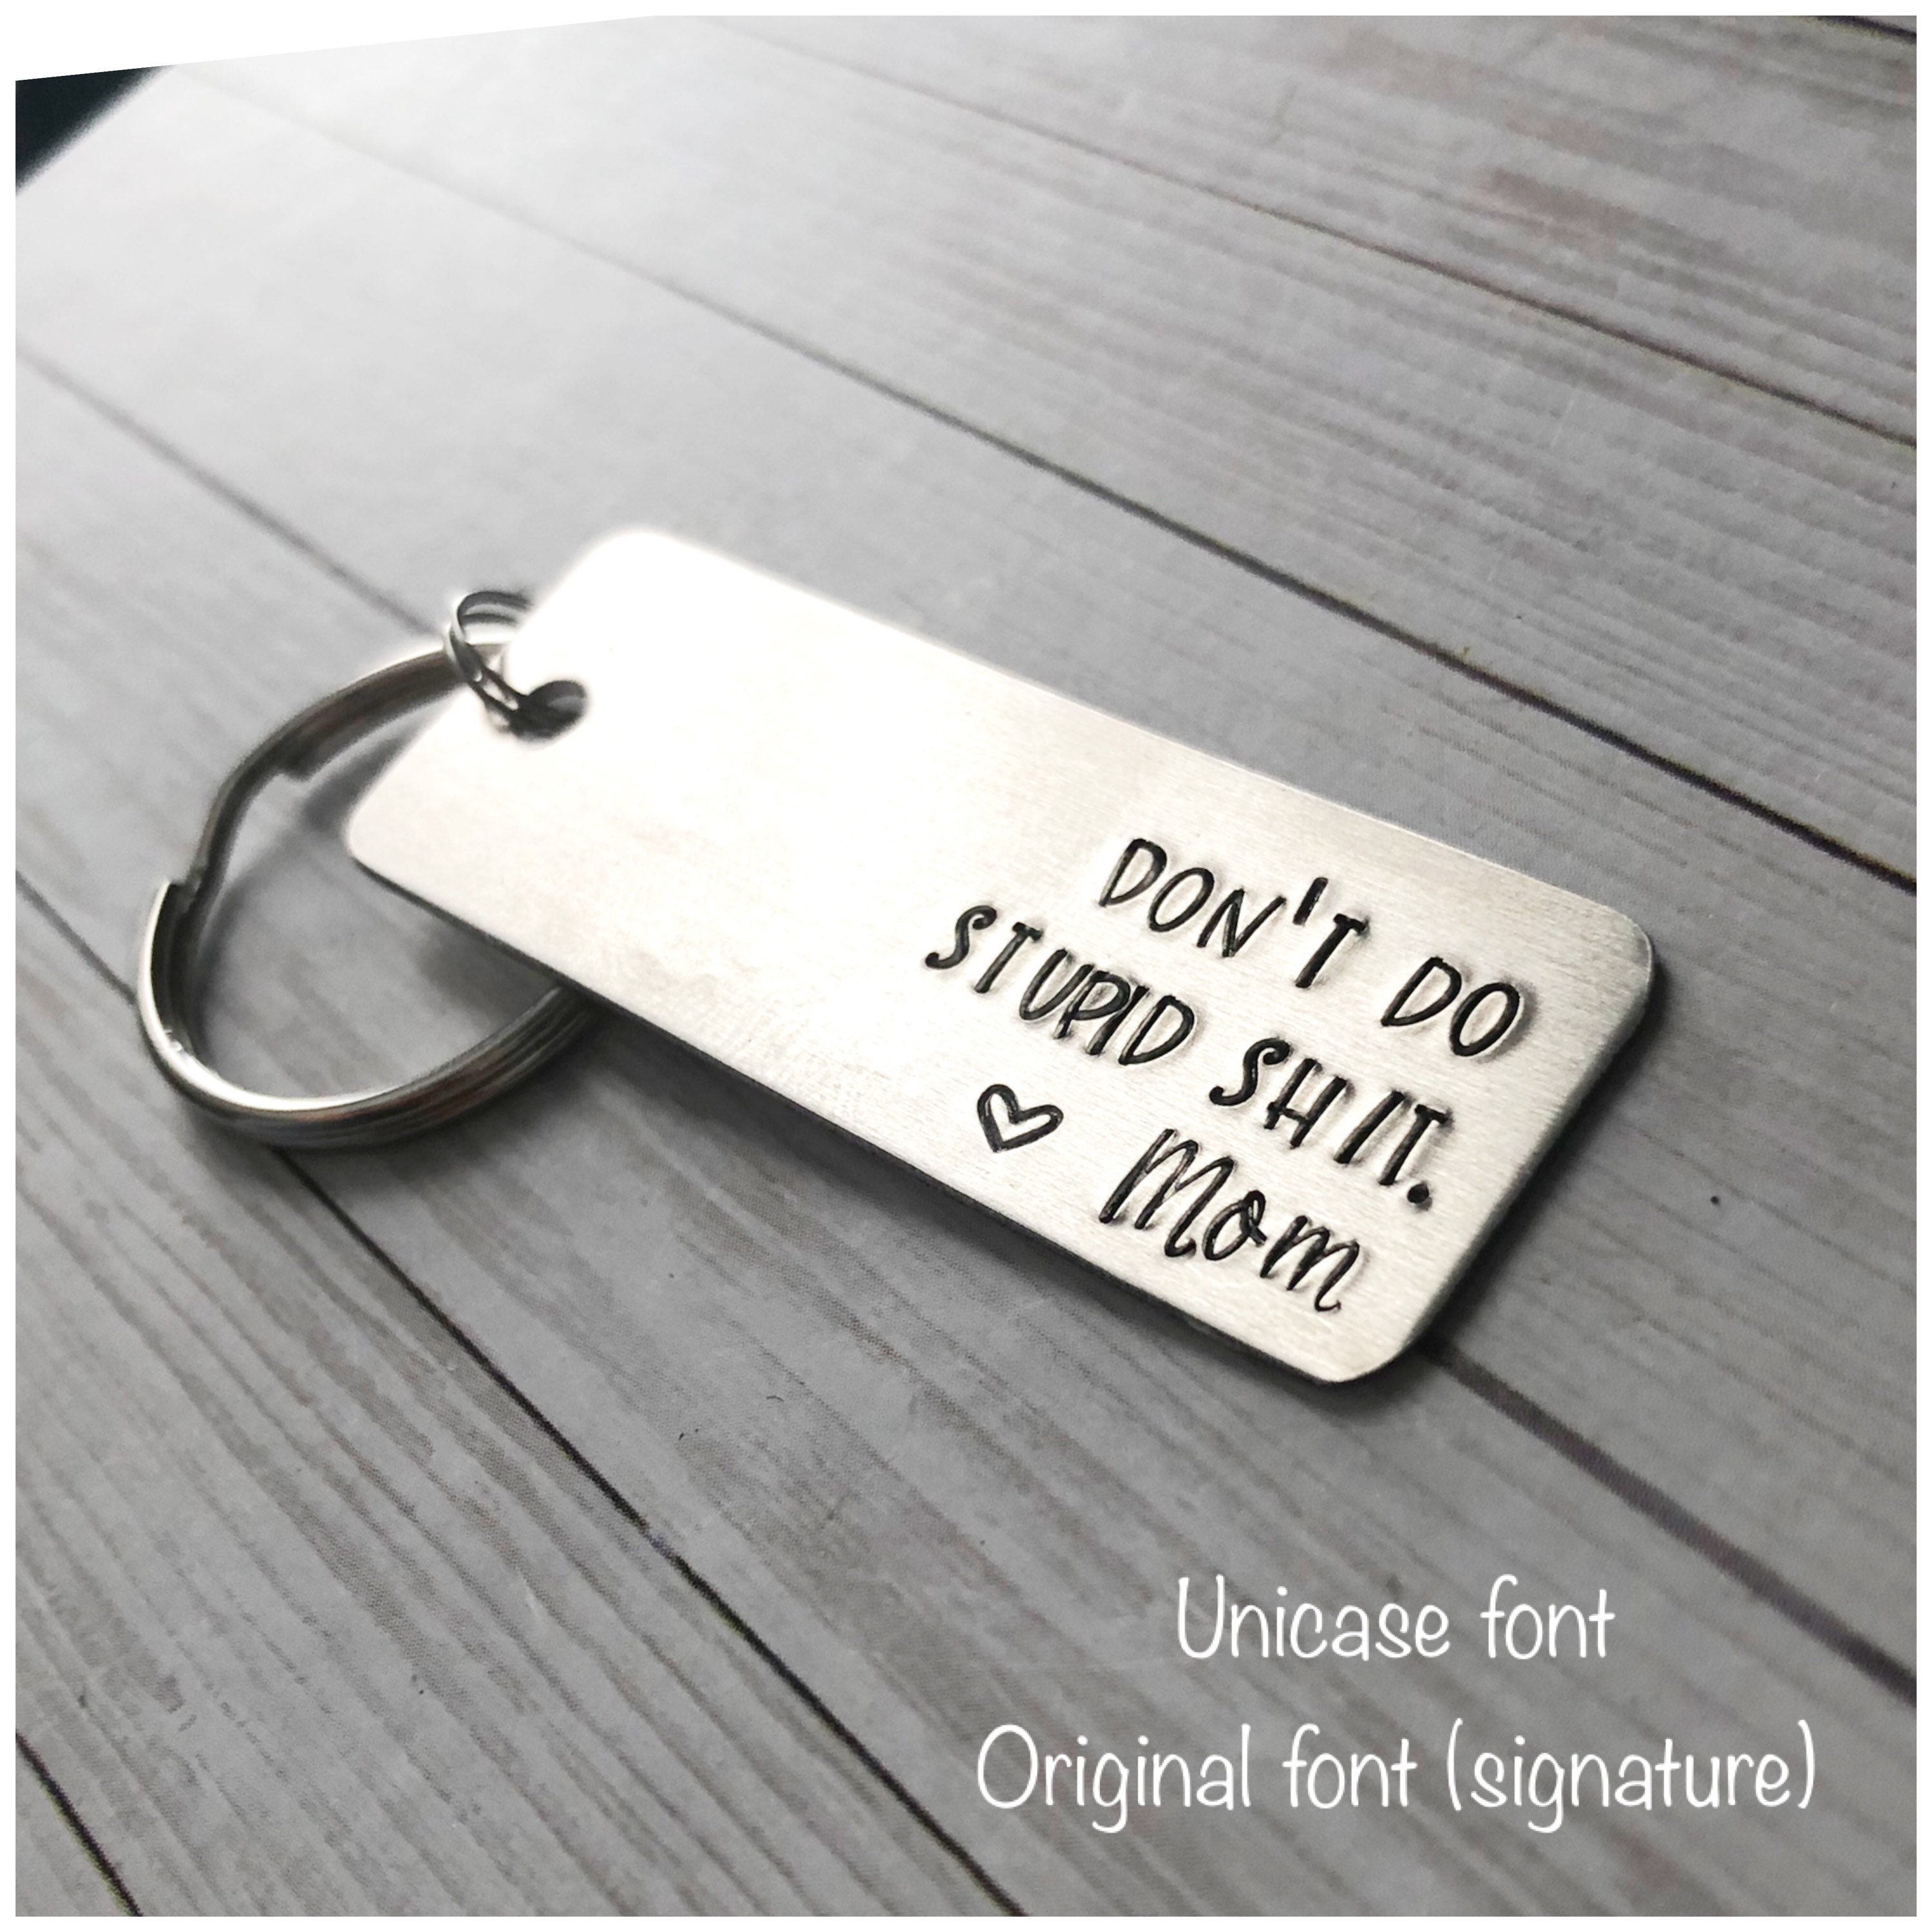 Don't Do Stupid Shit, Love Mom & Dad Dog Tag, Keychain, Key Ring, Metal  Stamped, Hand Stamped, Gift